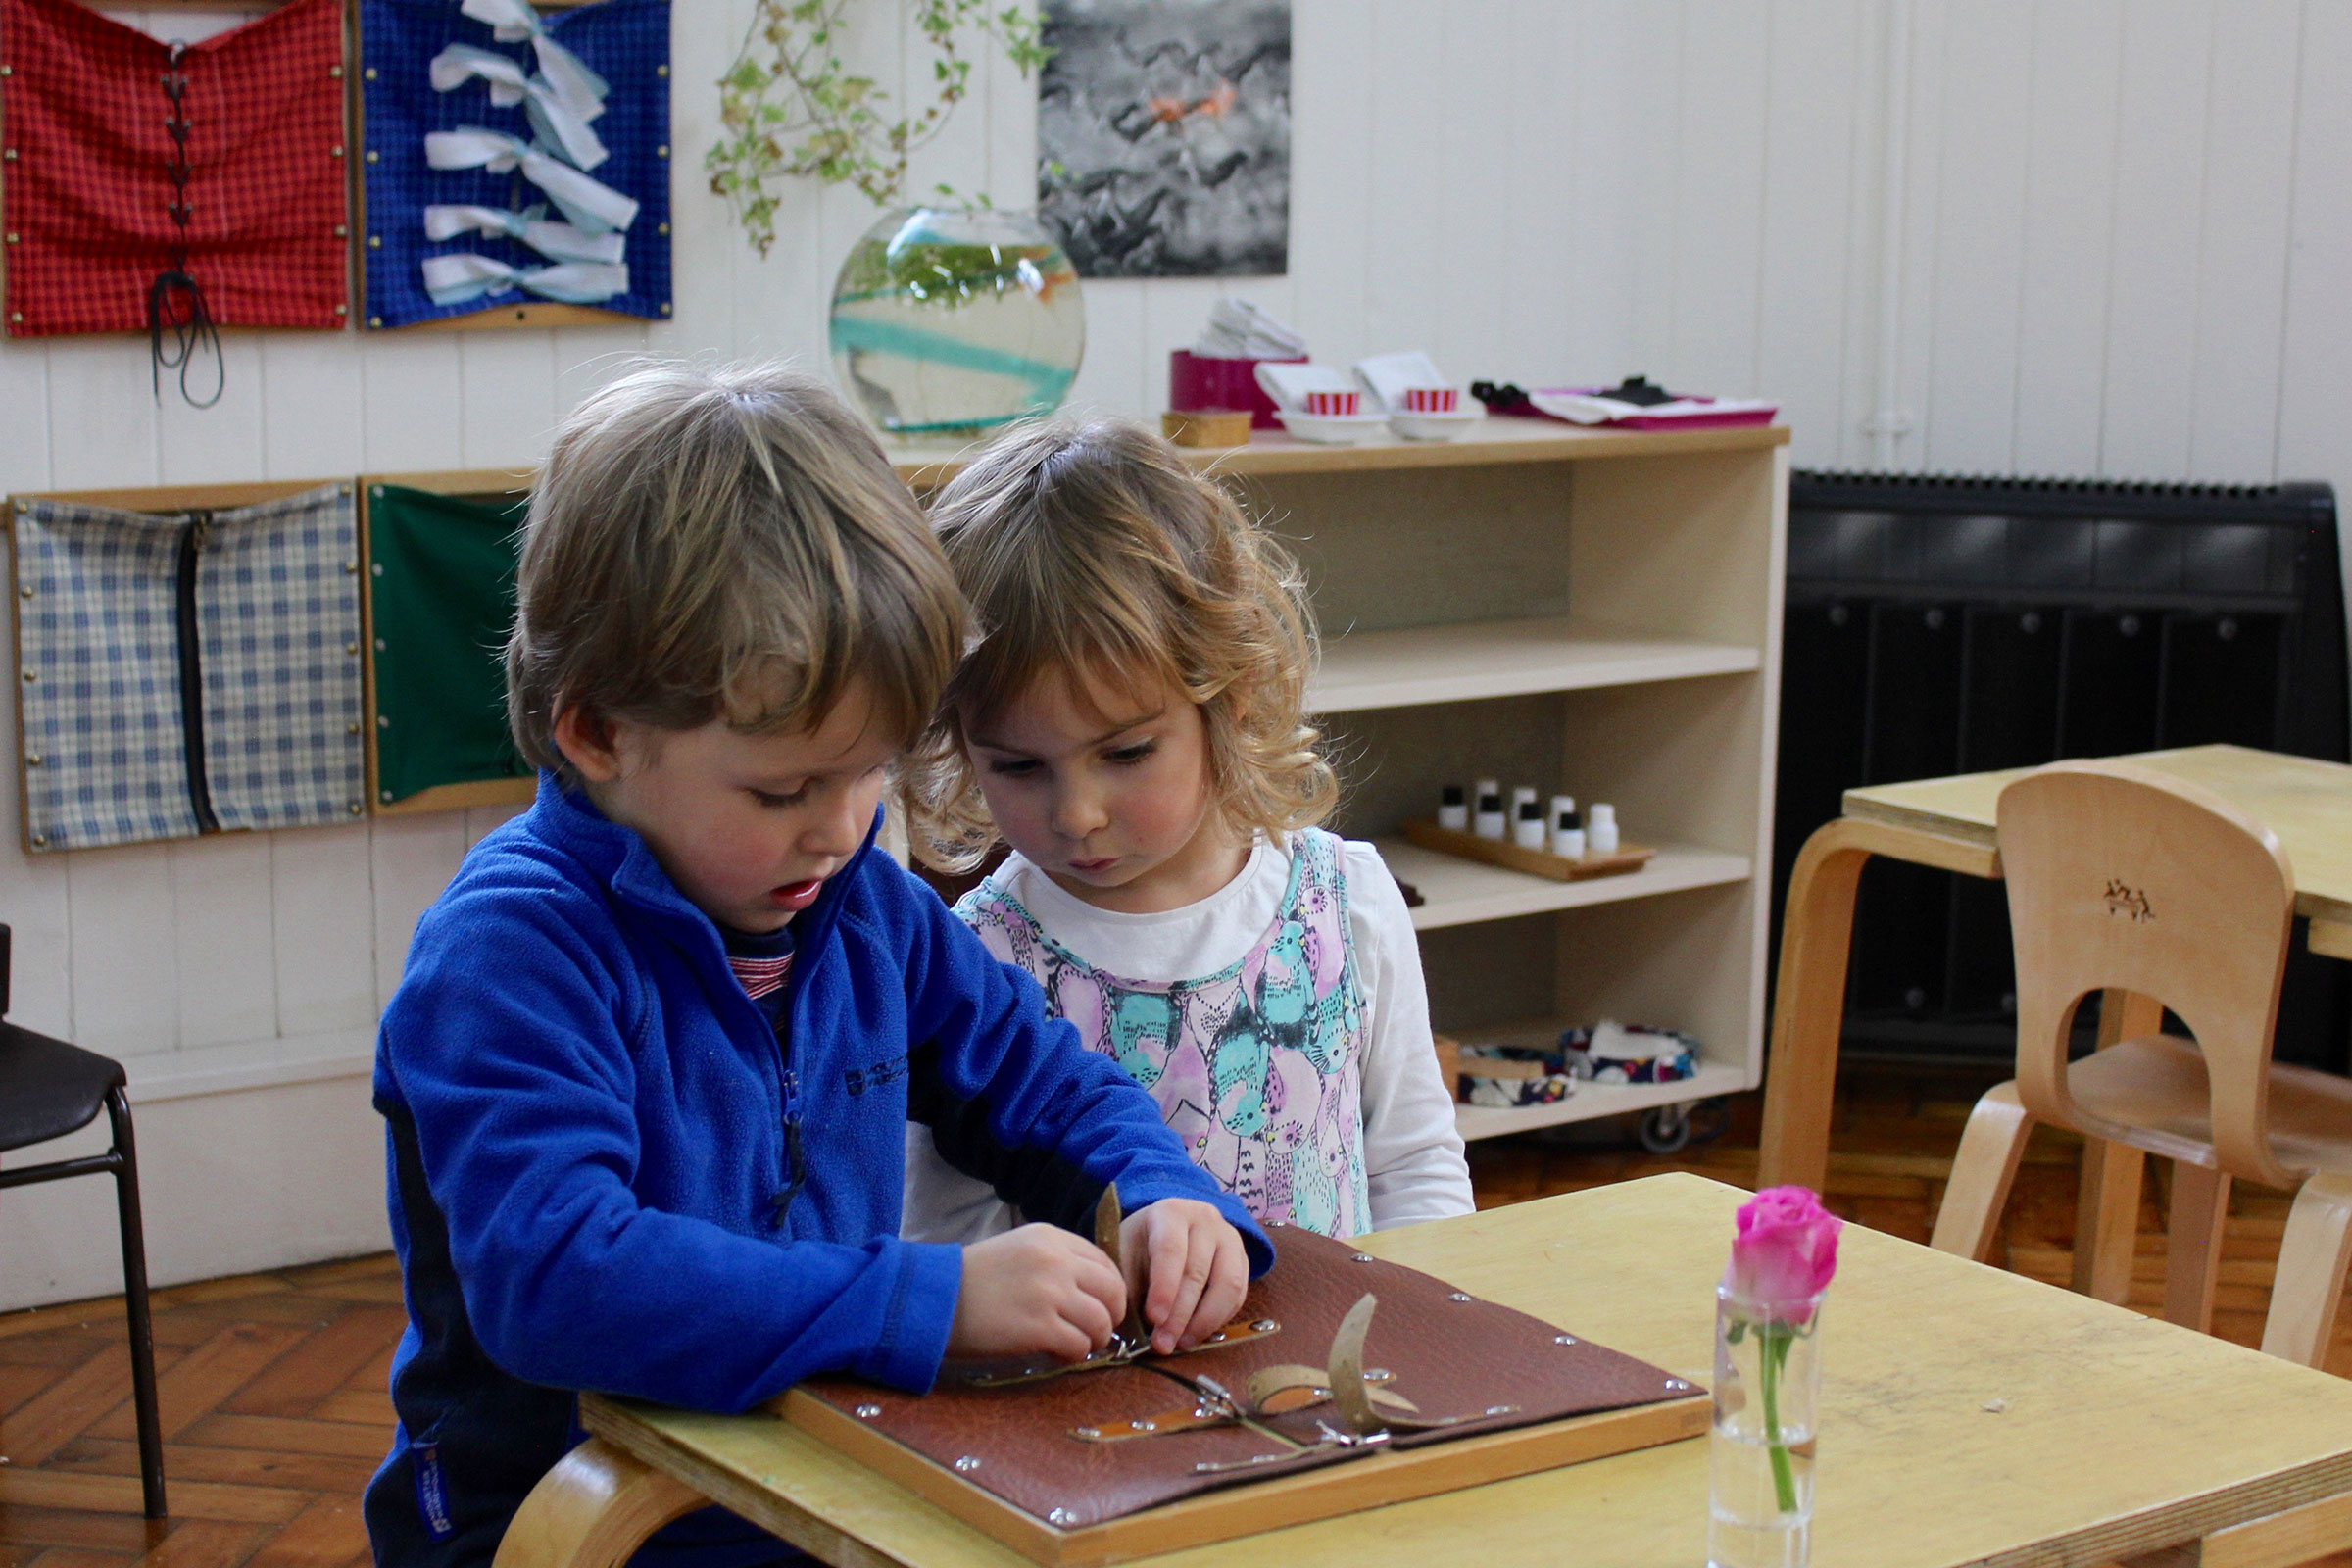 Child showing another child a Montessori material